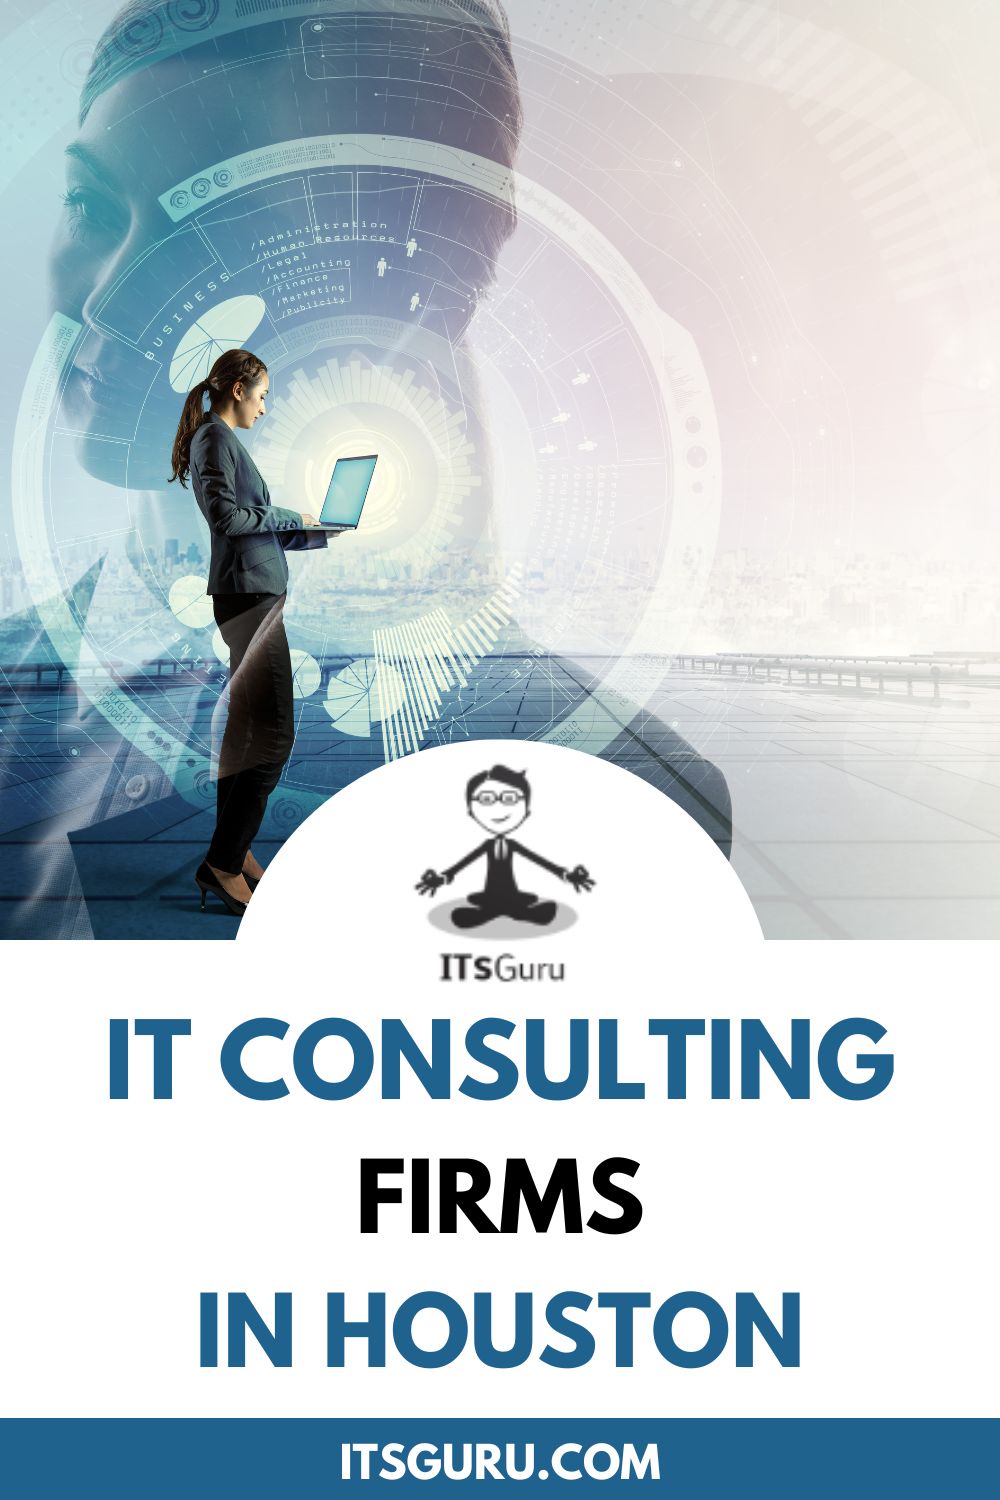 Why You Should Consider Working With an IT Consulting Firm in Houston